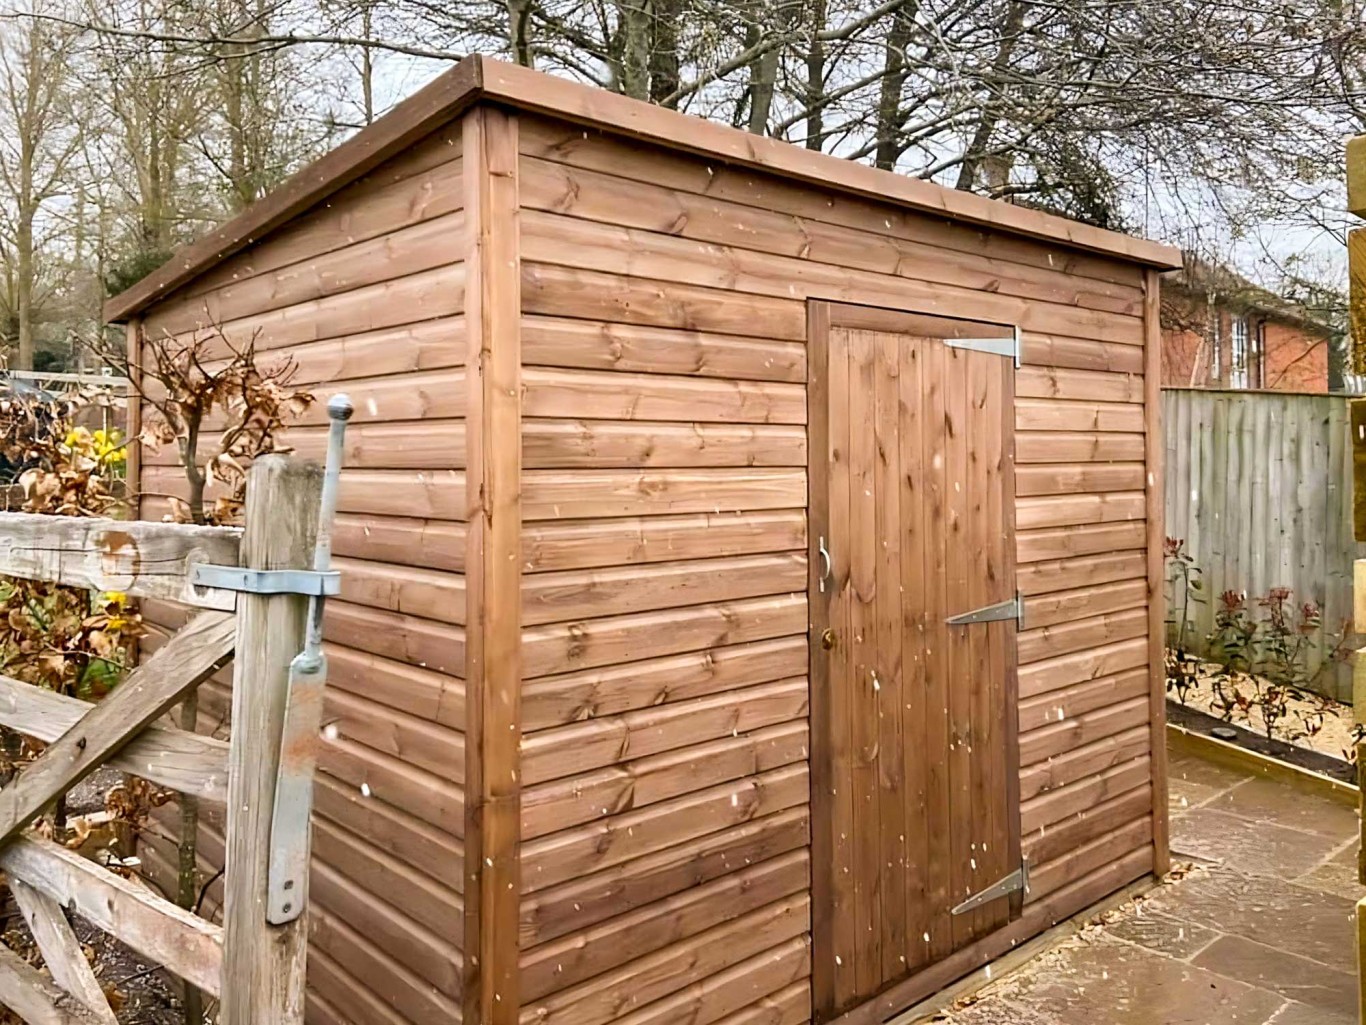 Large pent roof shed in a garden with a single door.